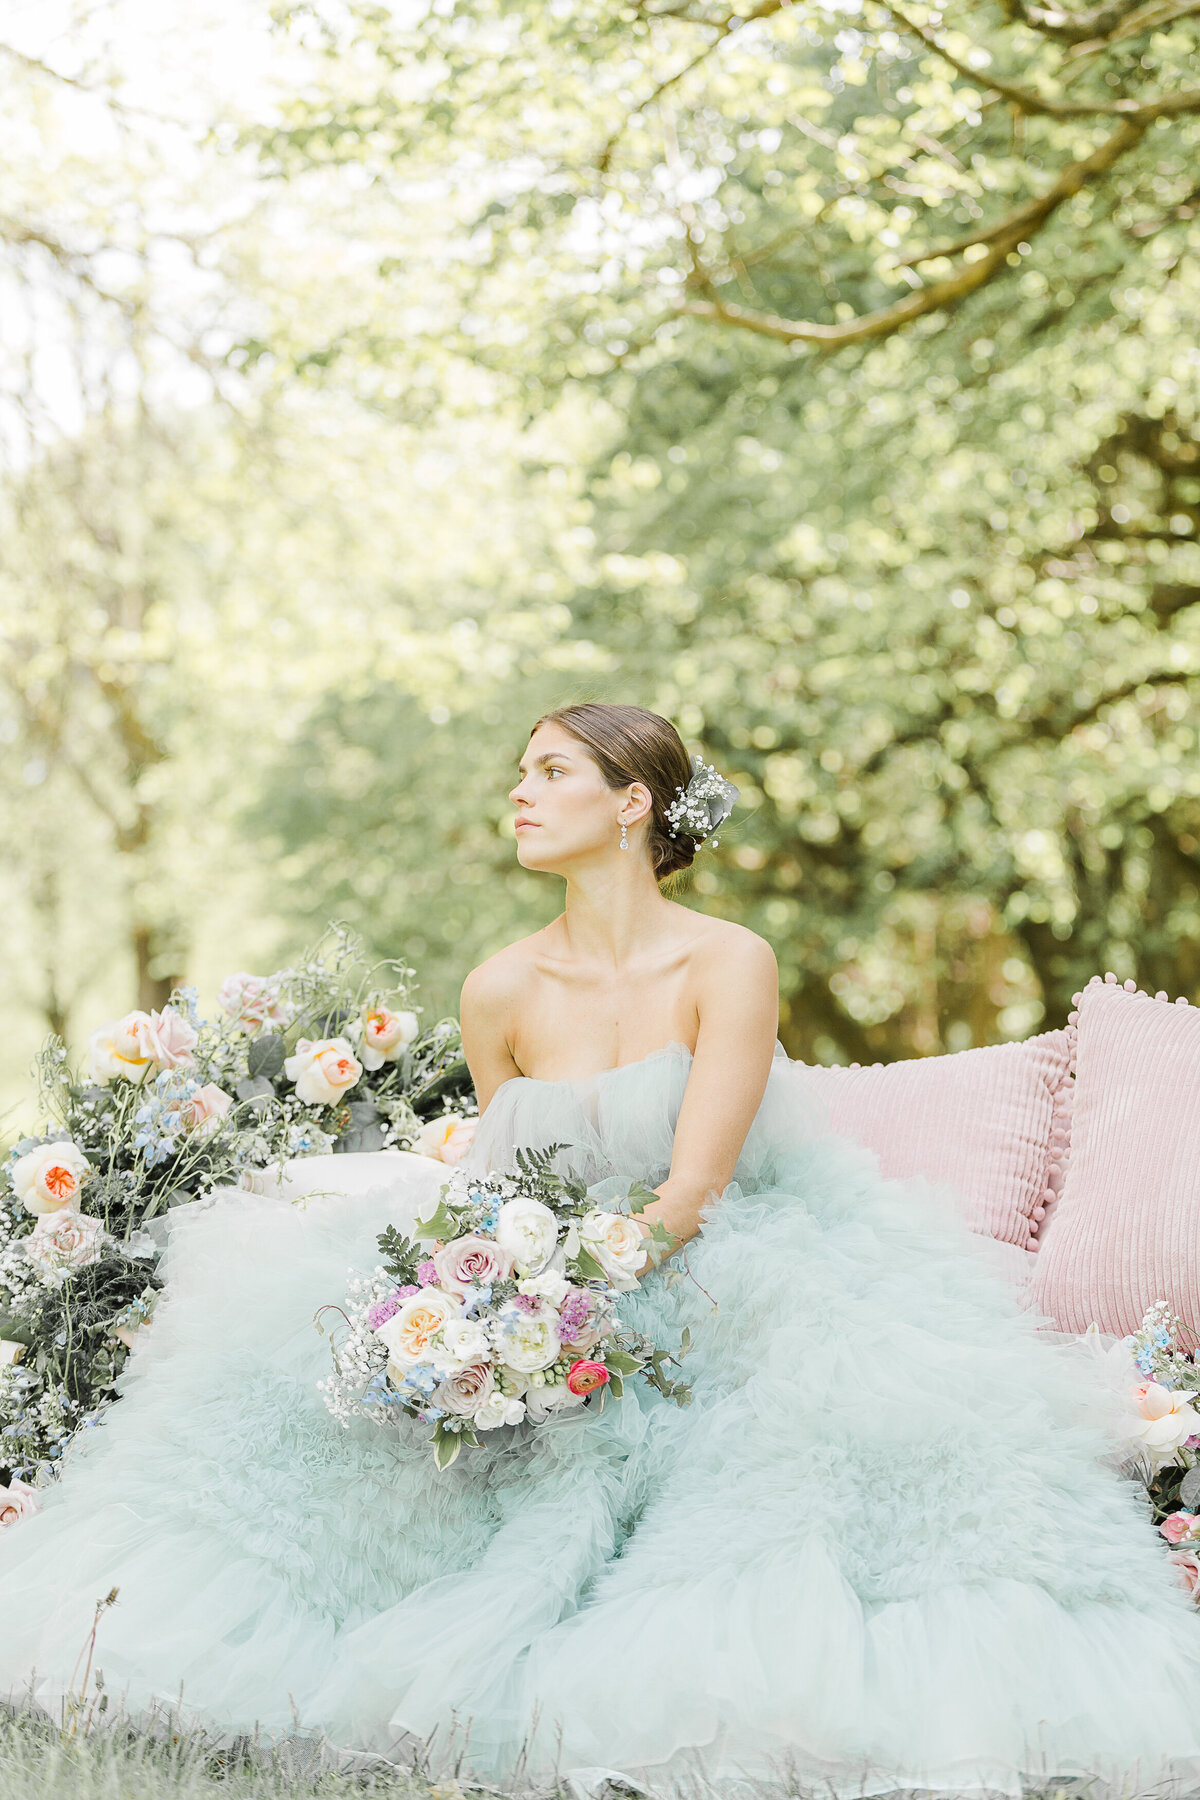 Bride poses for an editorial-style wedding portrait. Her gown is light blue and she is sitting on a pink couch outdoors and surrounded by bouquets of flowers. She is looking over her shoulder and into the distance. Captured by best New England Wedding Photographer Lia Rose Weddings